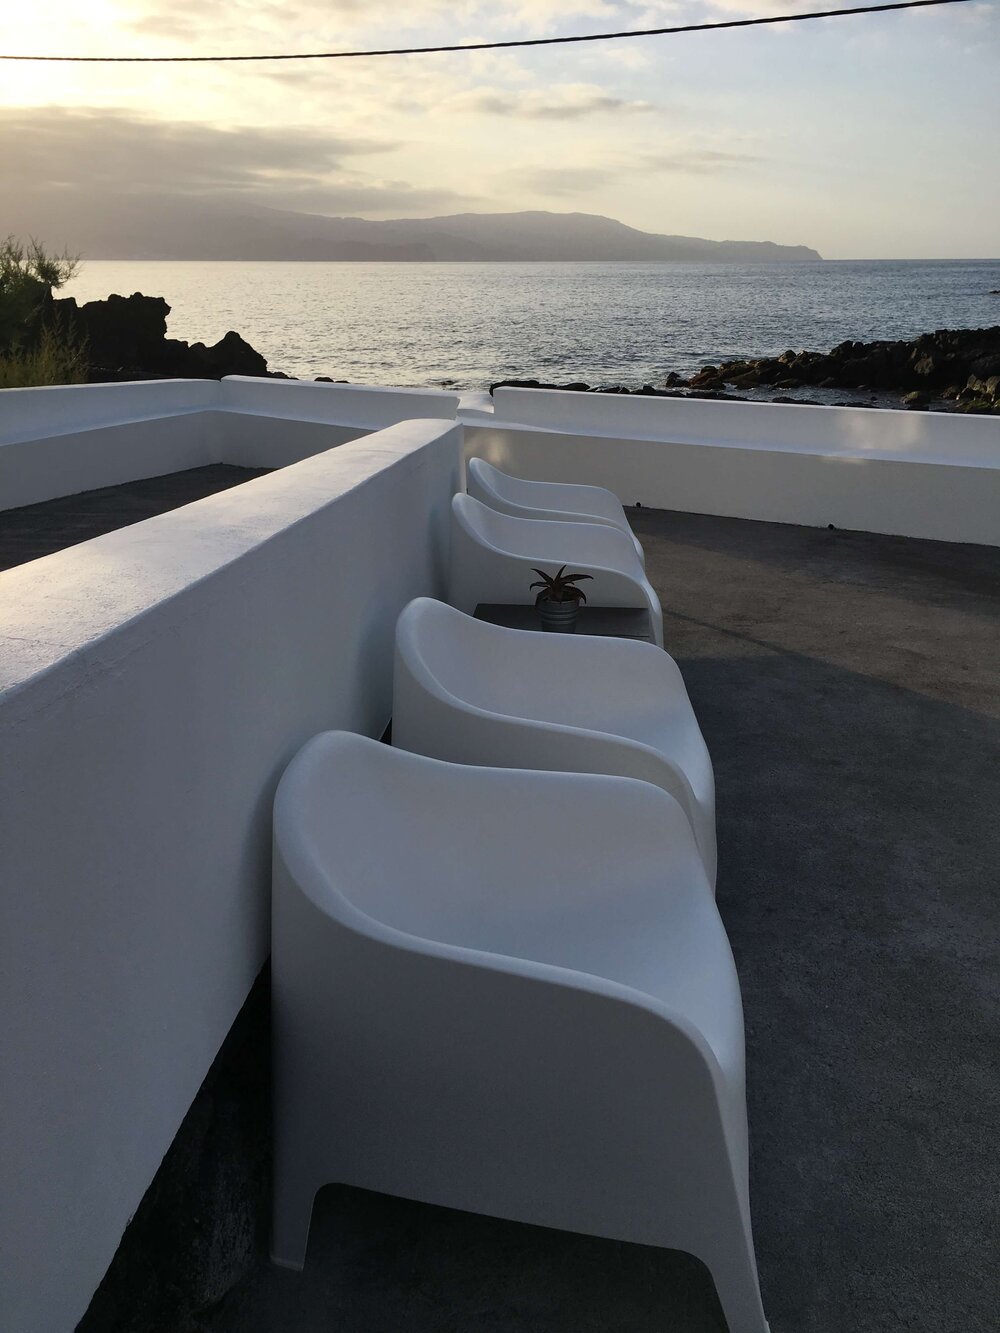 ocean-view-with-chairs-and-architectural-lines